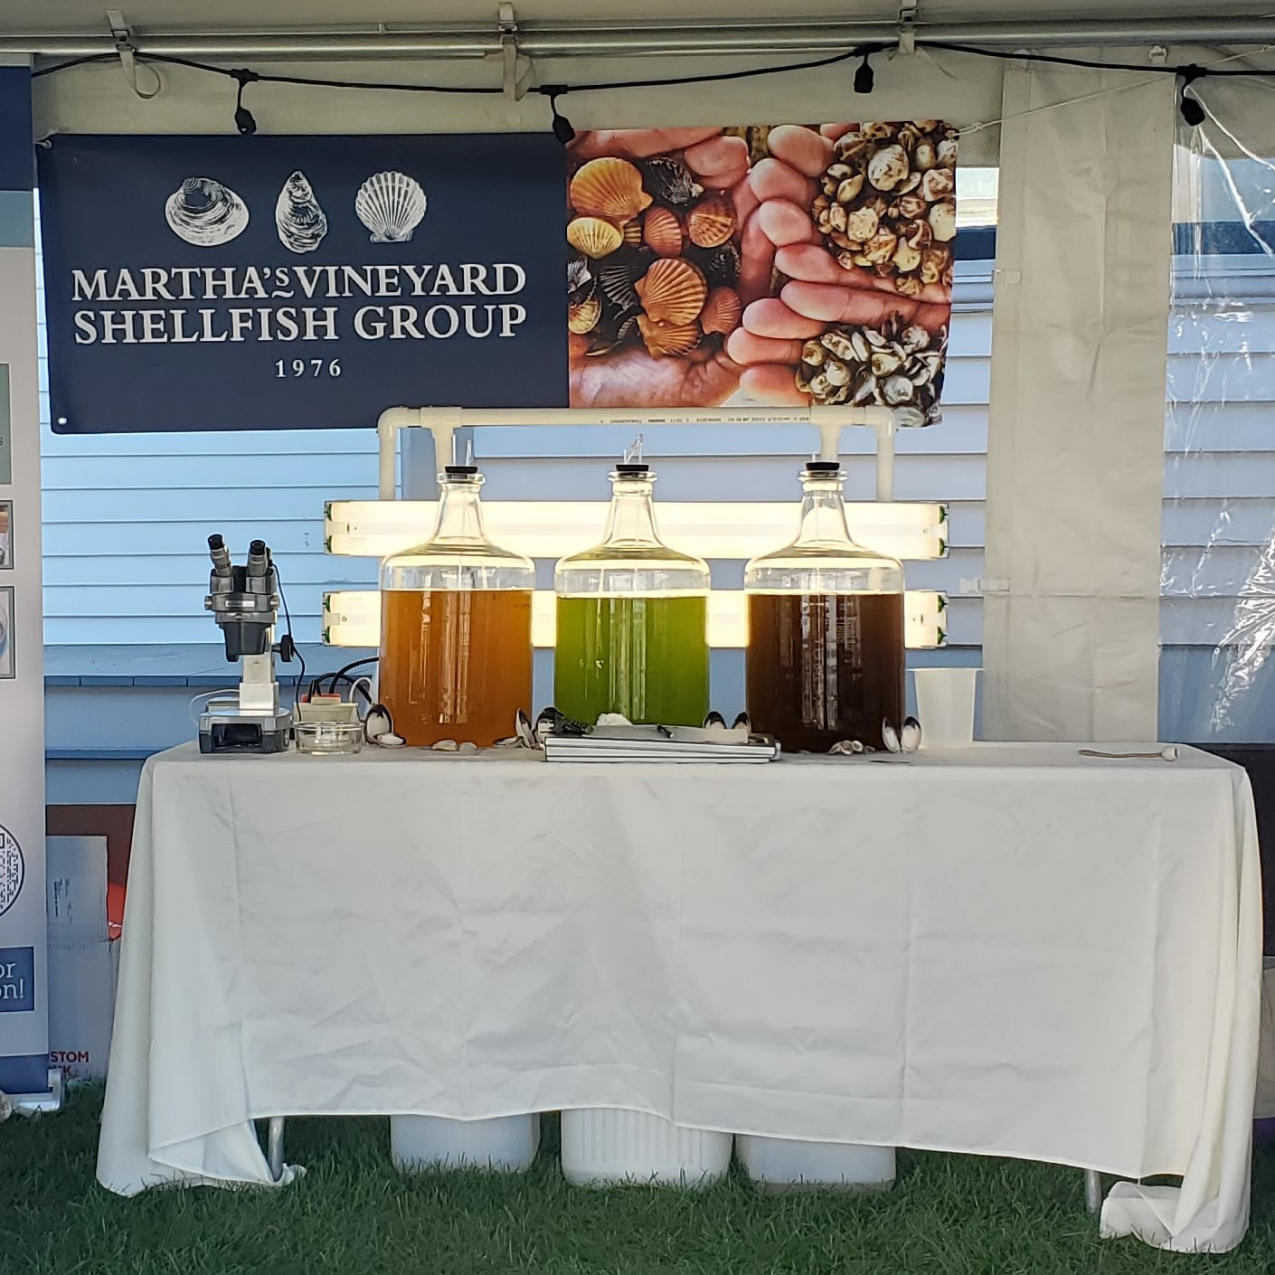 A banner in an outside event tent reads “Martha’s Vineyard Shellfish Group 1976” with a photo of scallops, mussels, and clams. Underneath the banner is a table with a microscope set up for samples from three large glass jars of liquid containing microalgae: one orange, one green, and one brown.